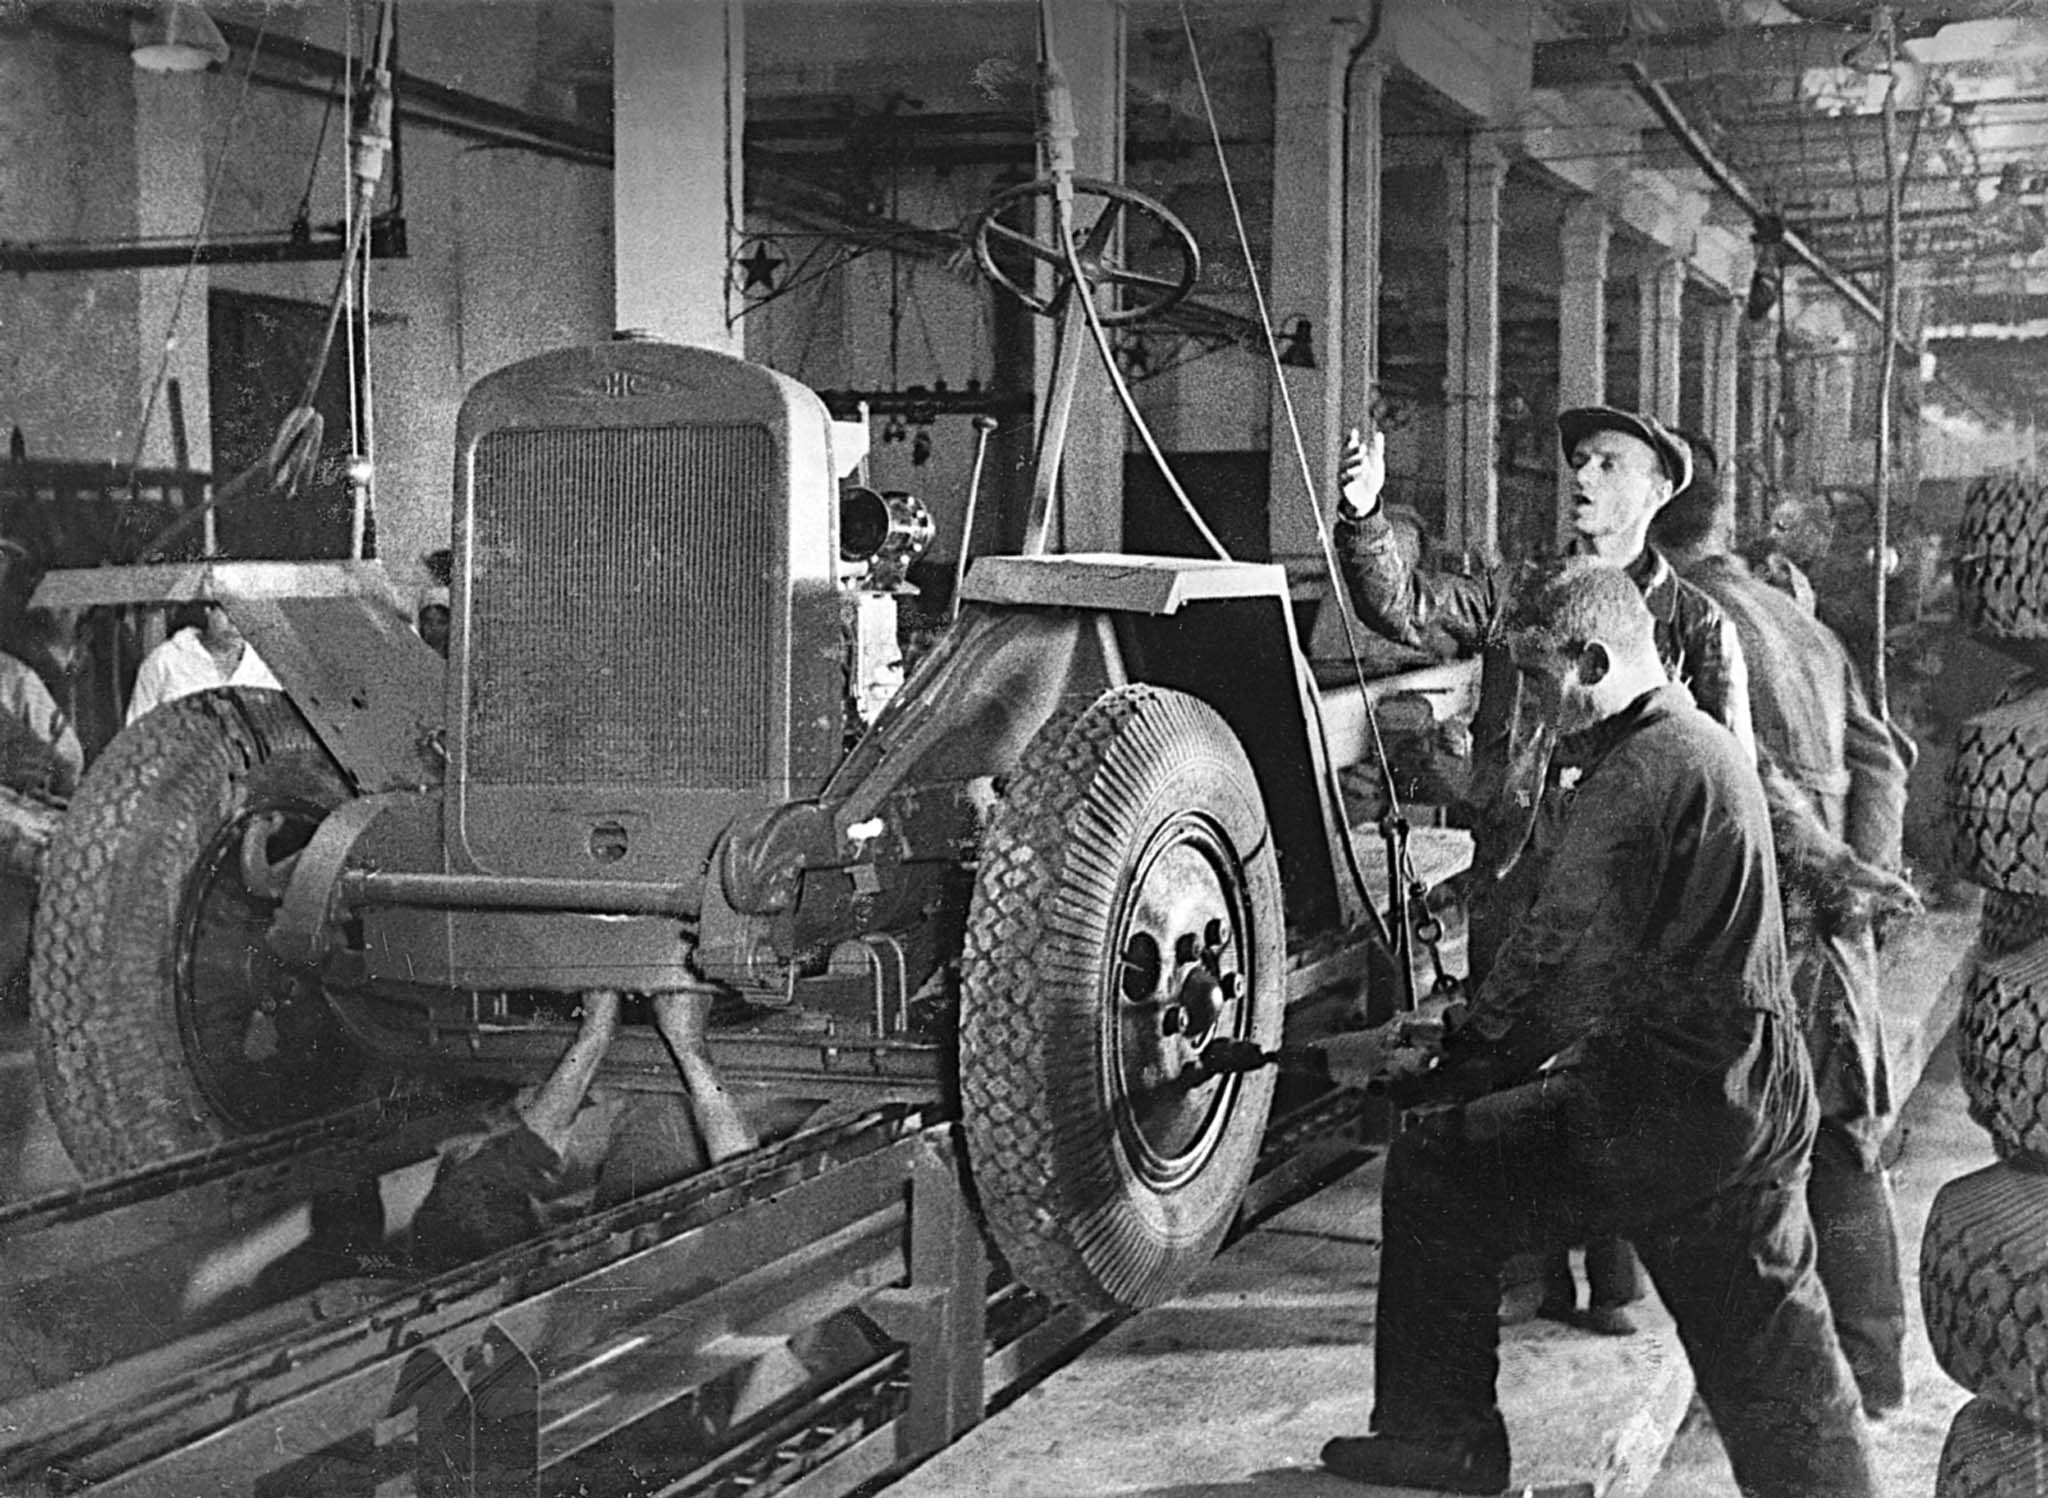 Soviet truck assembly during WWII